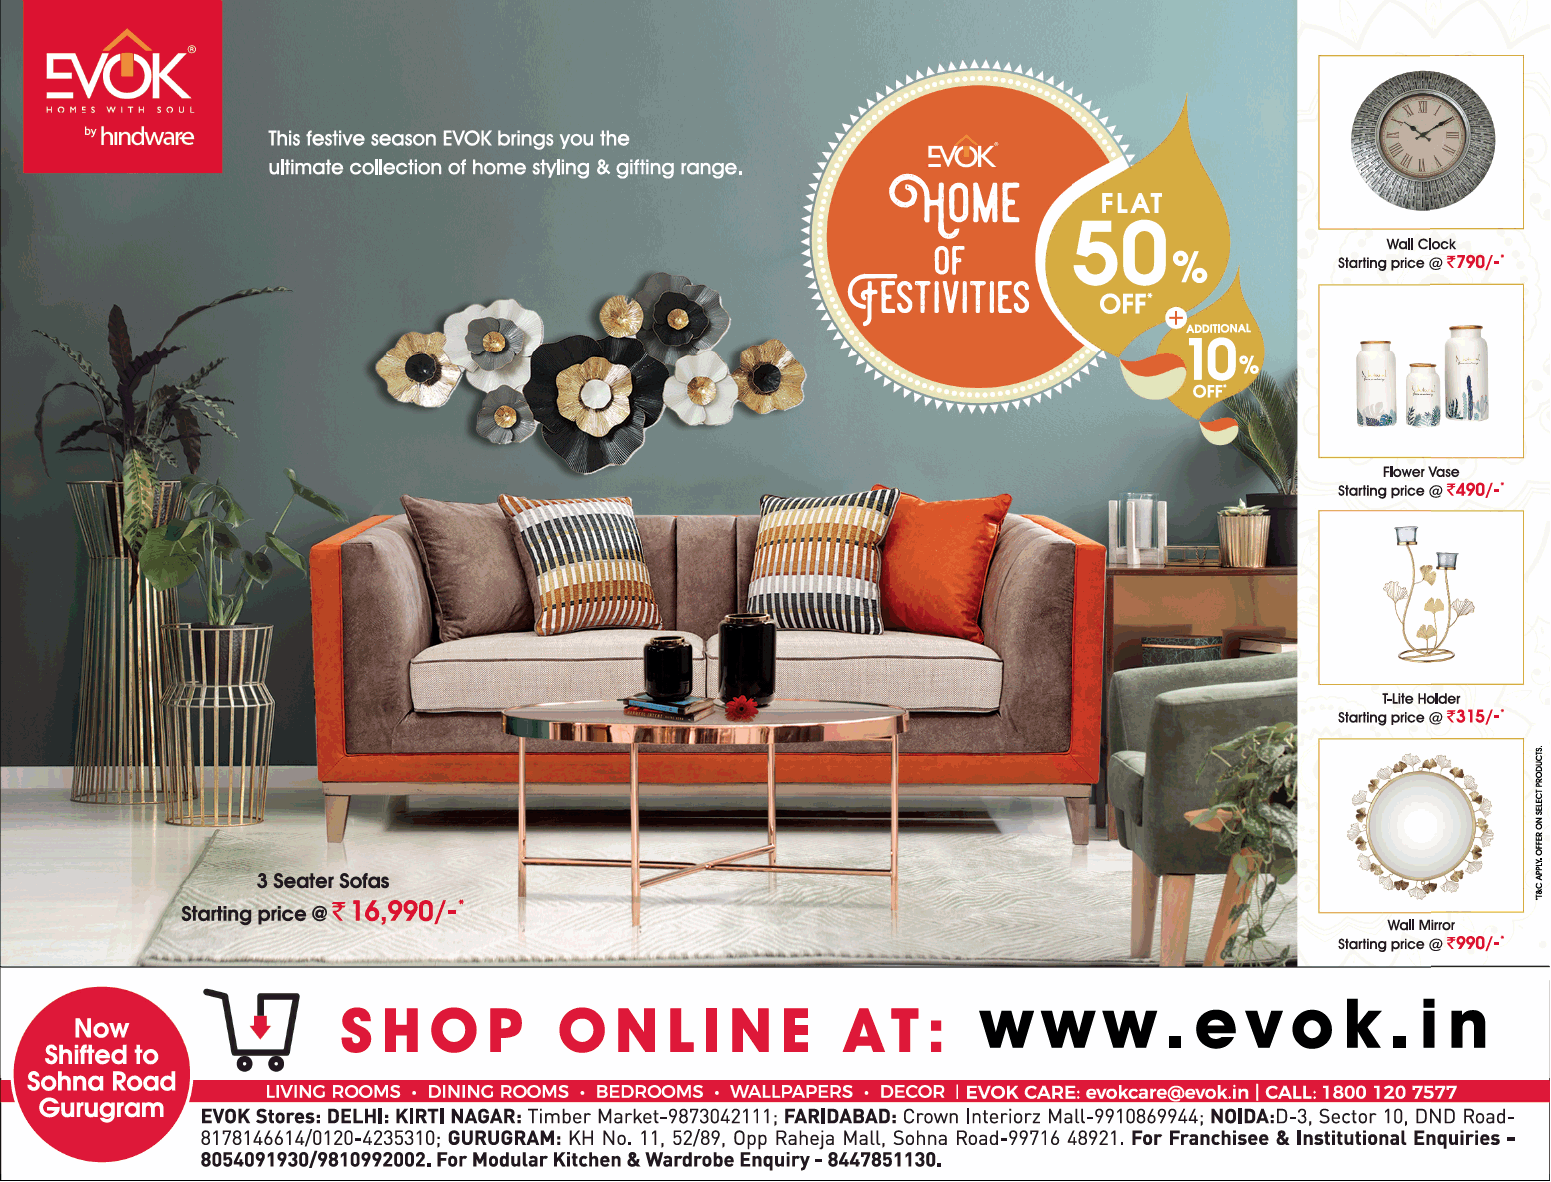 Evok By Hindware Home Of Festivities Flat 50 Off Ad Delhi Times 17 10 2020 